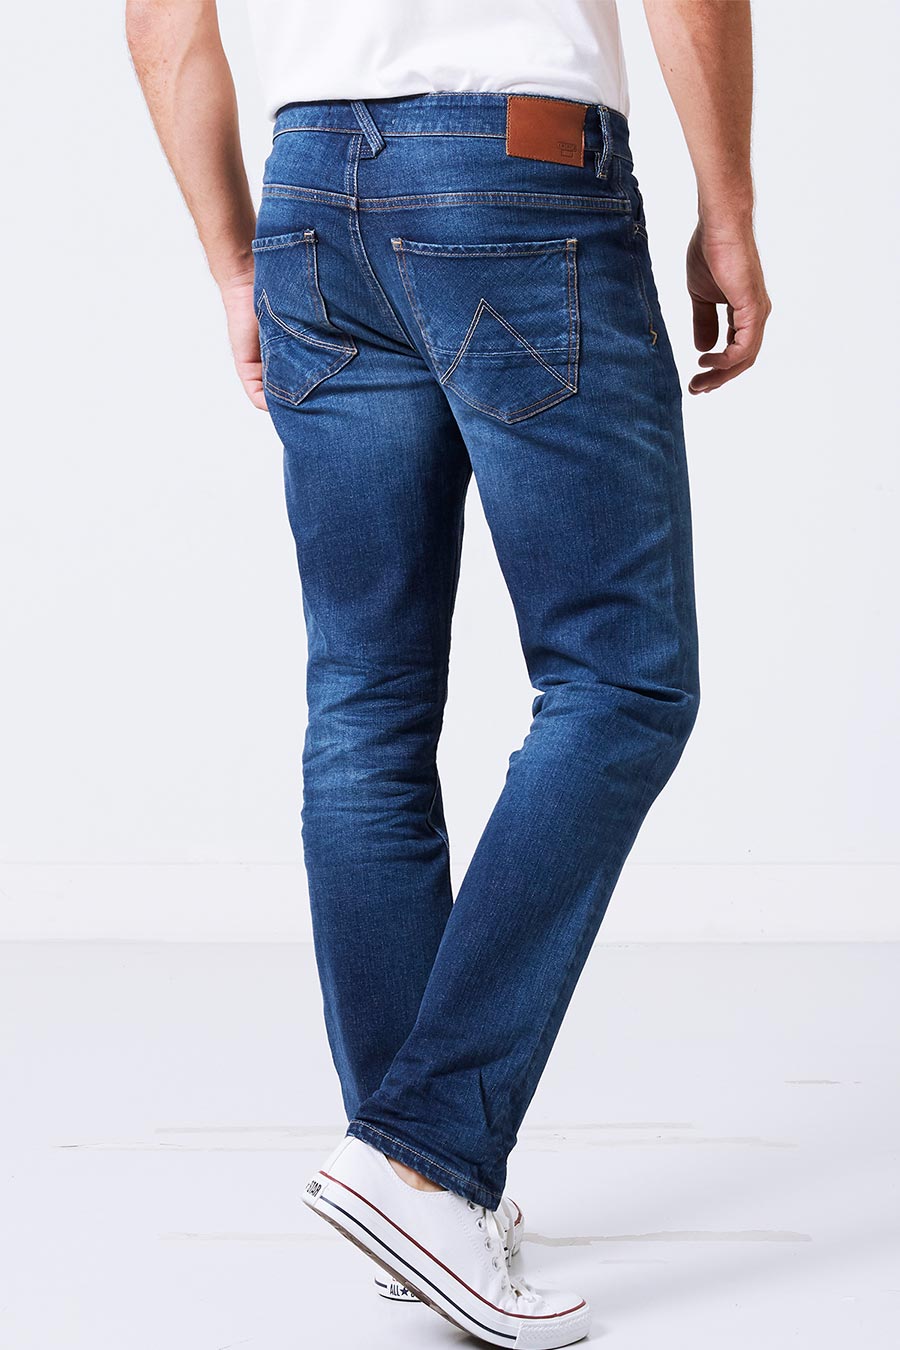 Men's jeans fit guide | America Today